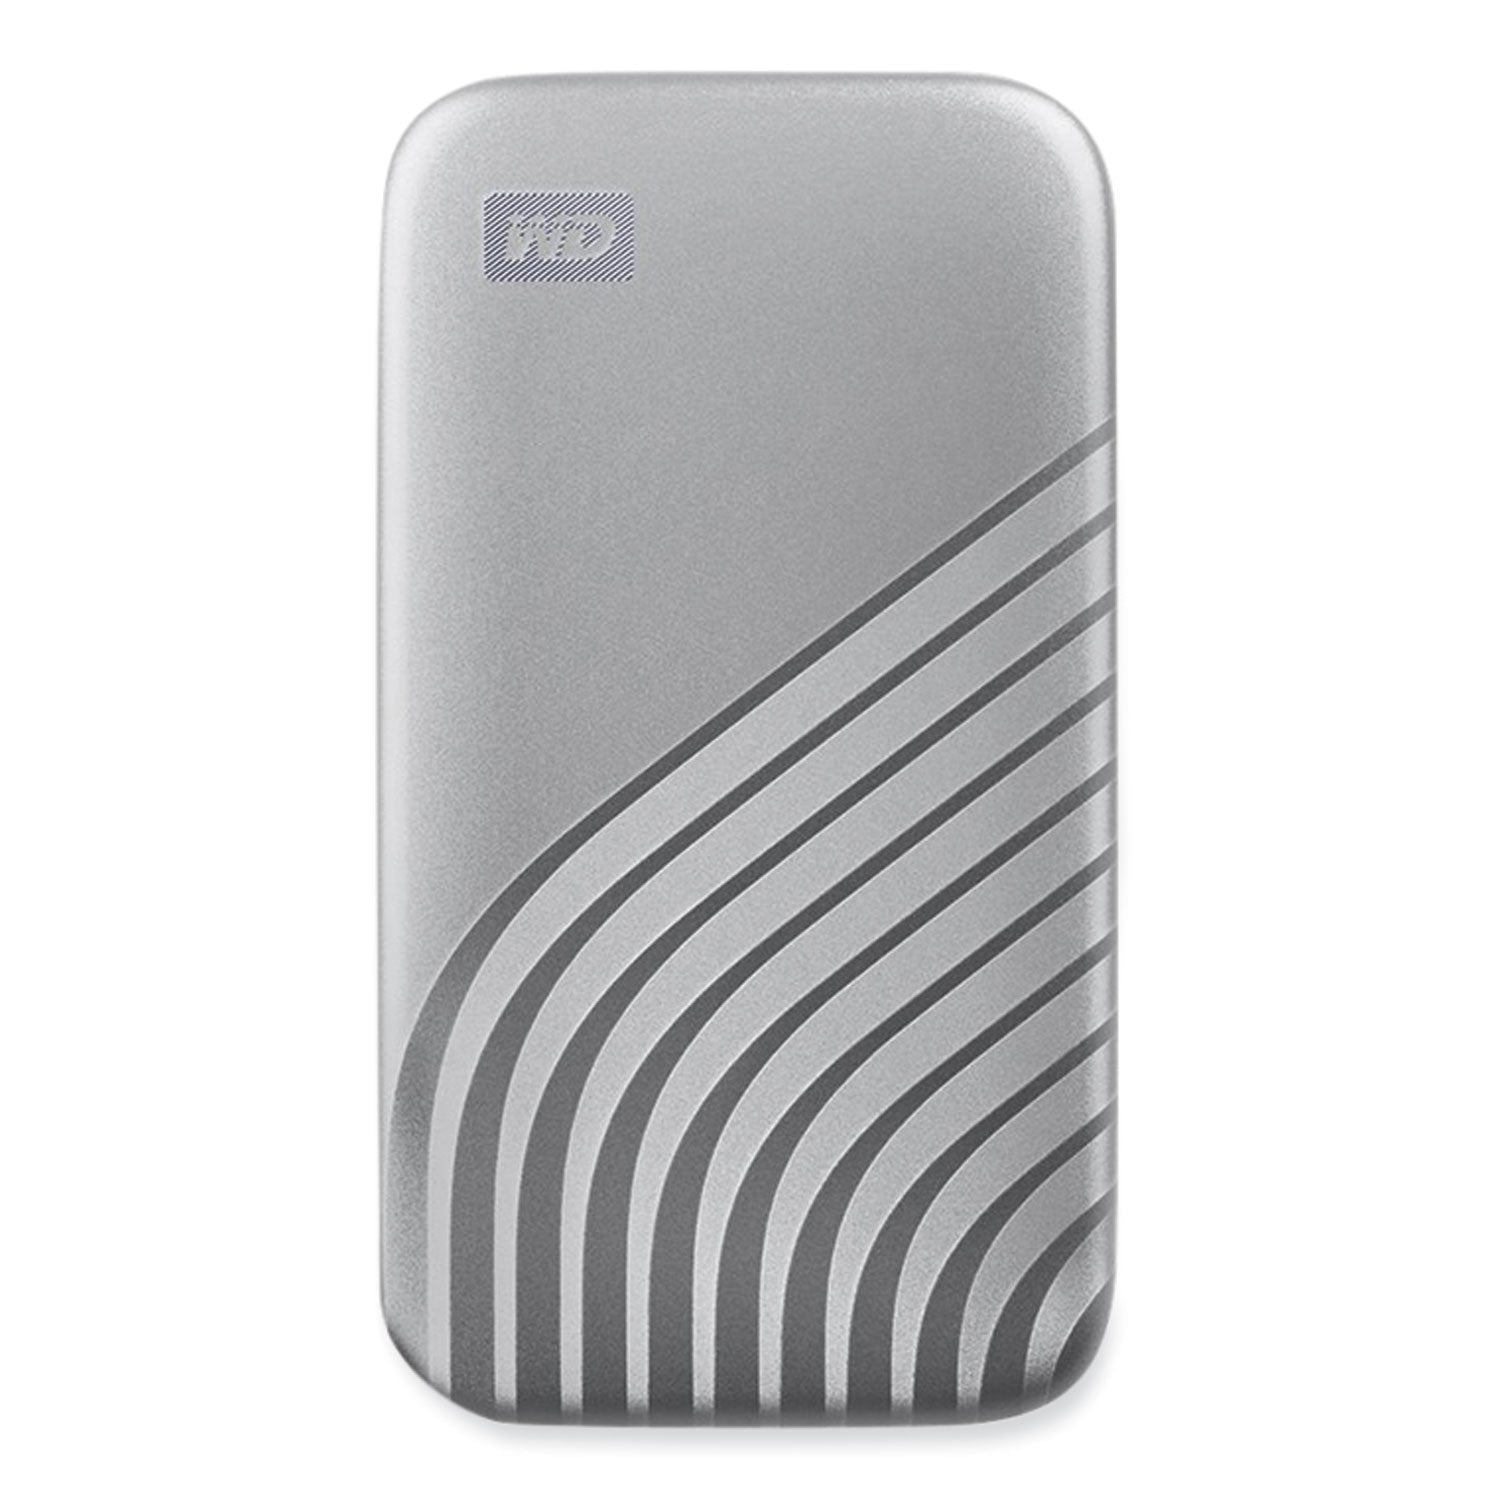 my-passport-external-solid-state-drive-1-tb-usb-32-silver_wdcagf0010bsl - 1